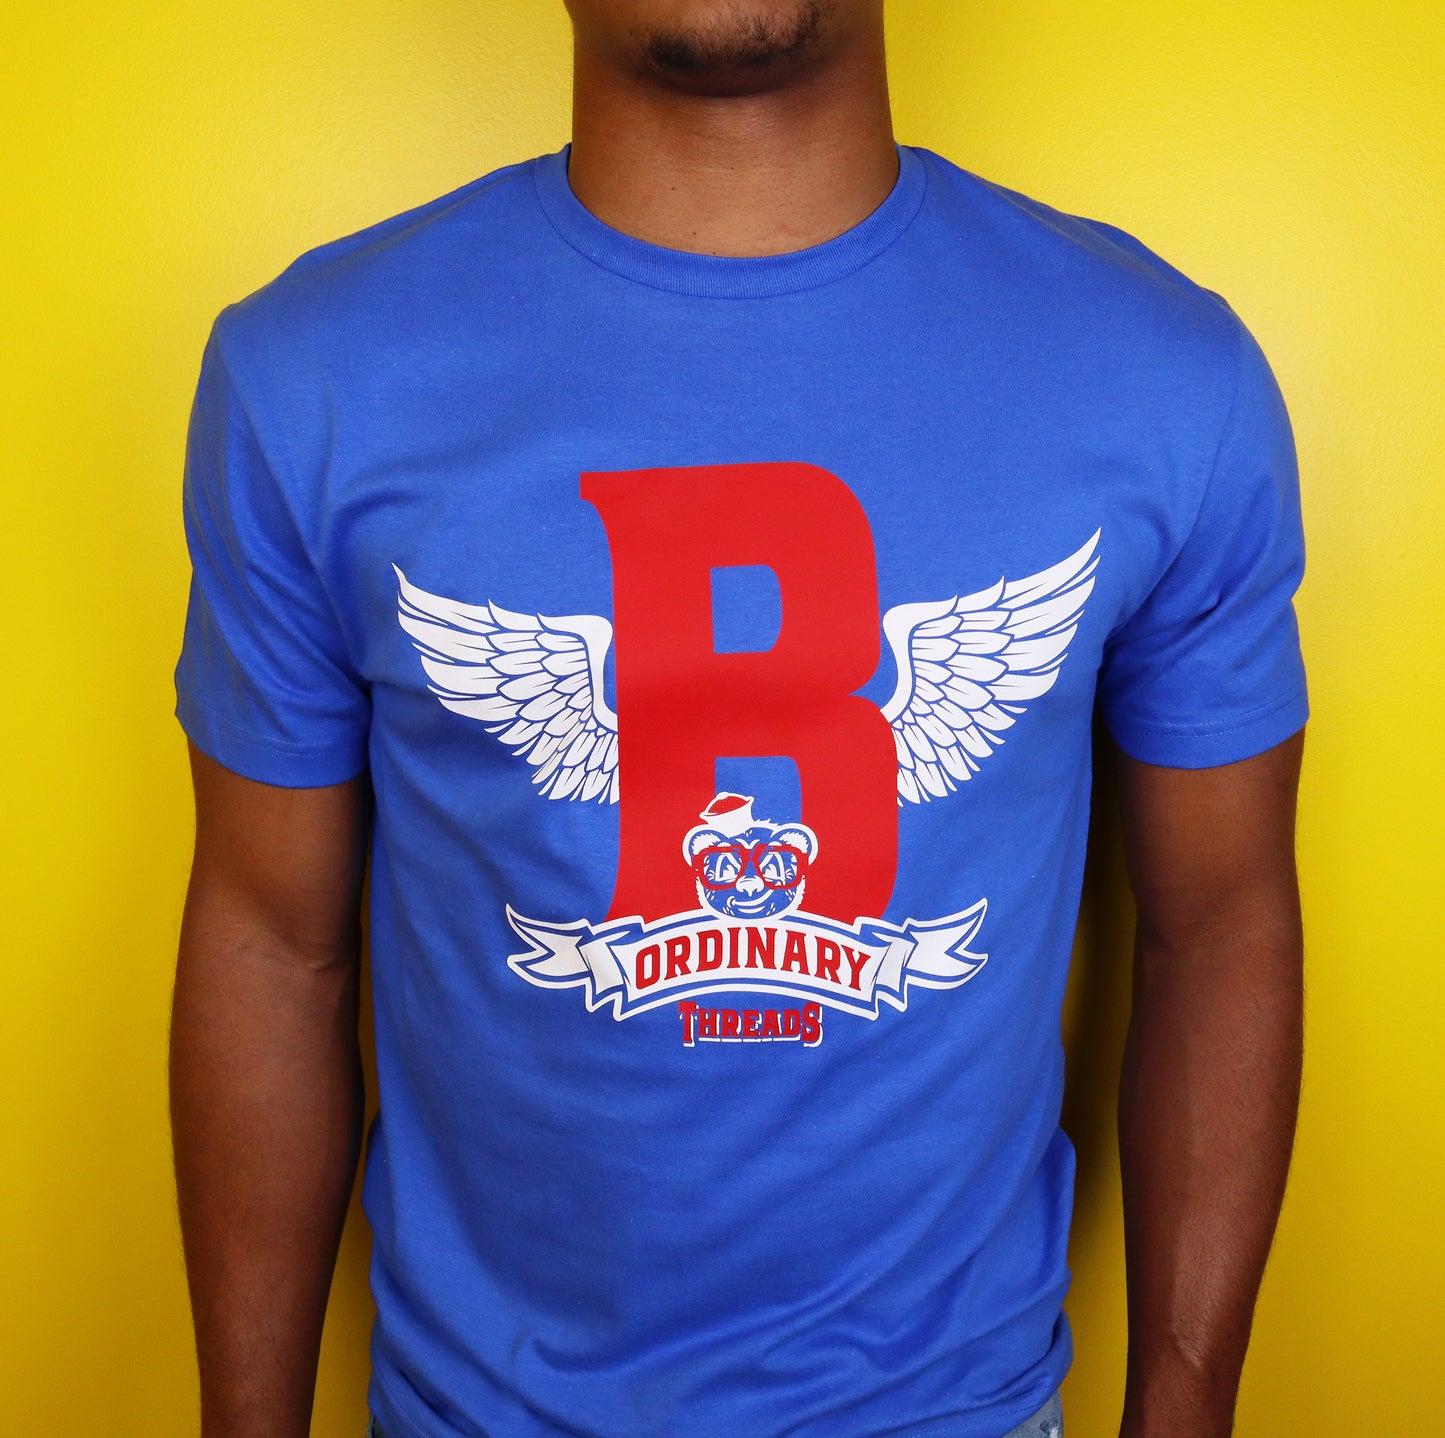 Barely "Winged B" Tee